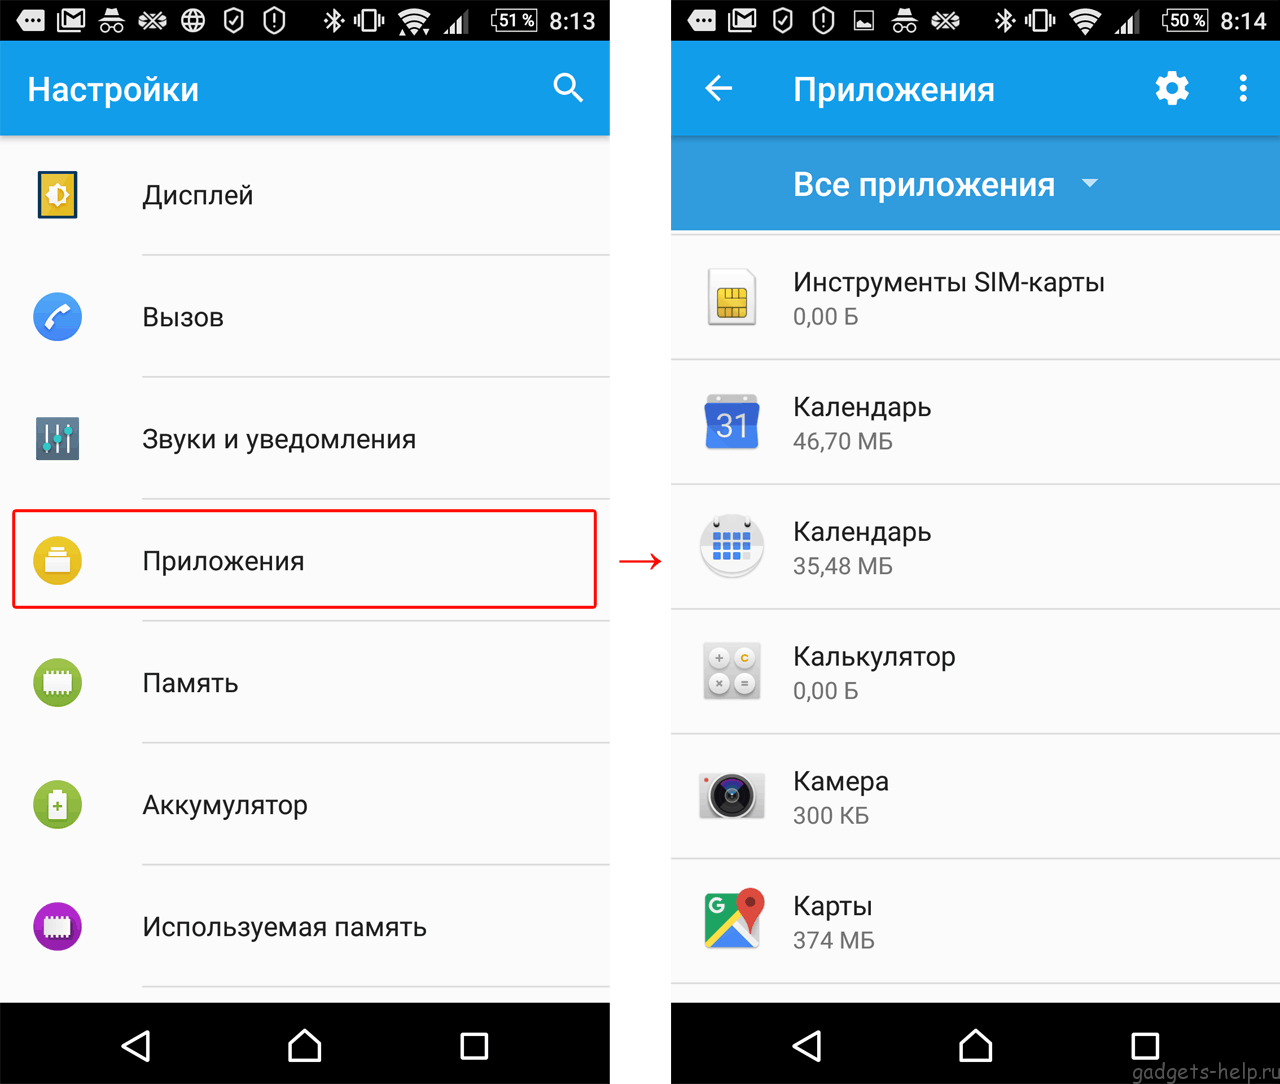 Android permissions